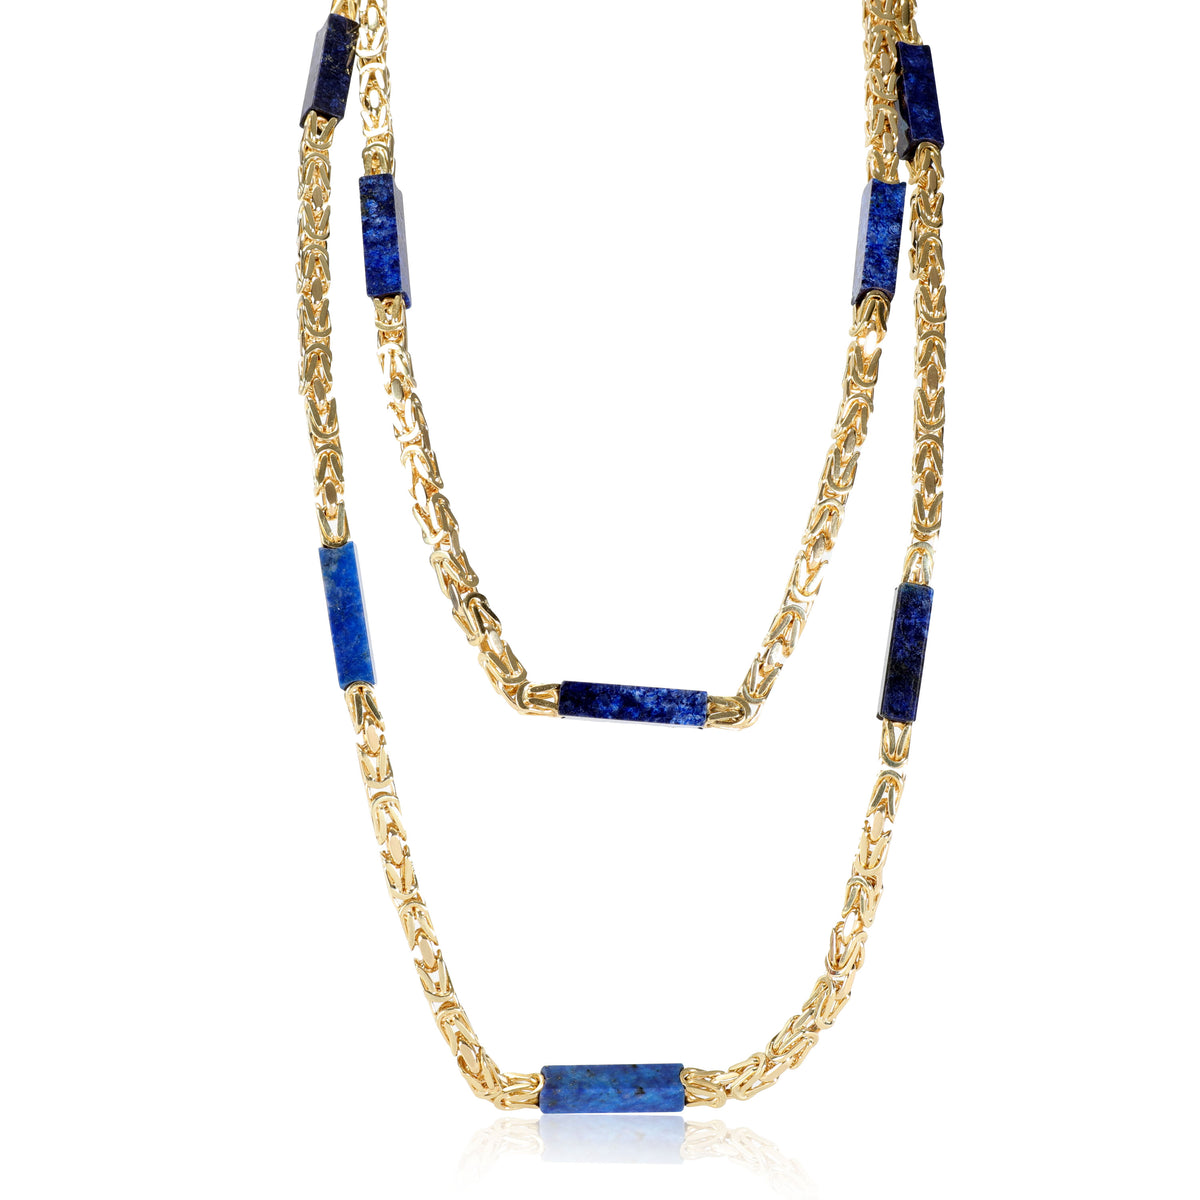 Vintage Lapiis Lazuli 10 Station Necklace in 18K Yelllow Gold